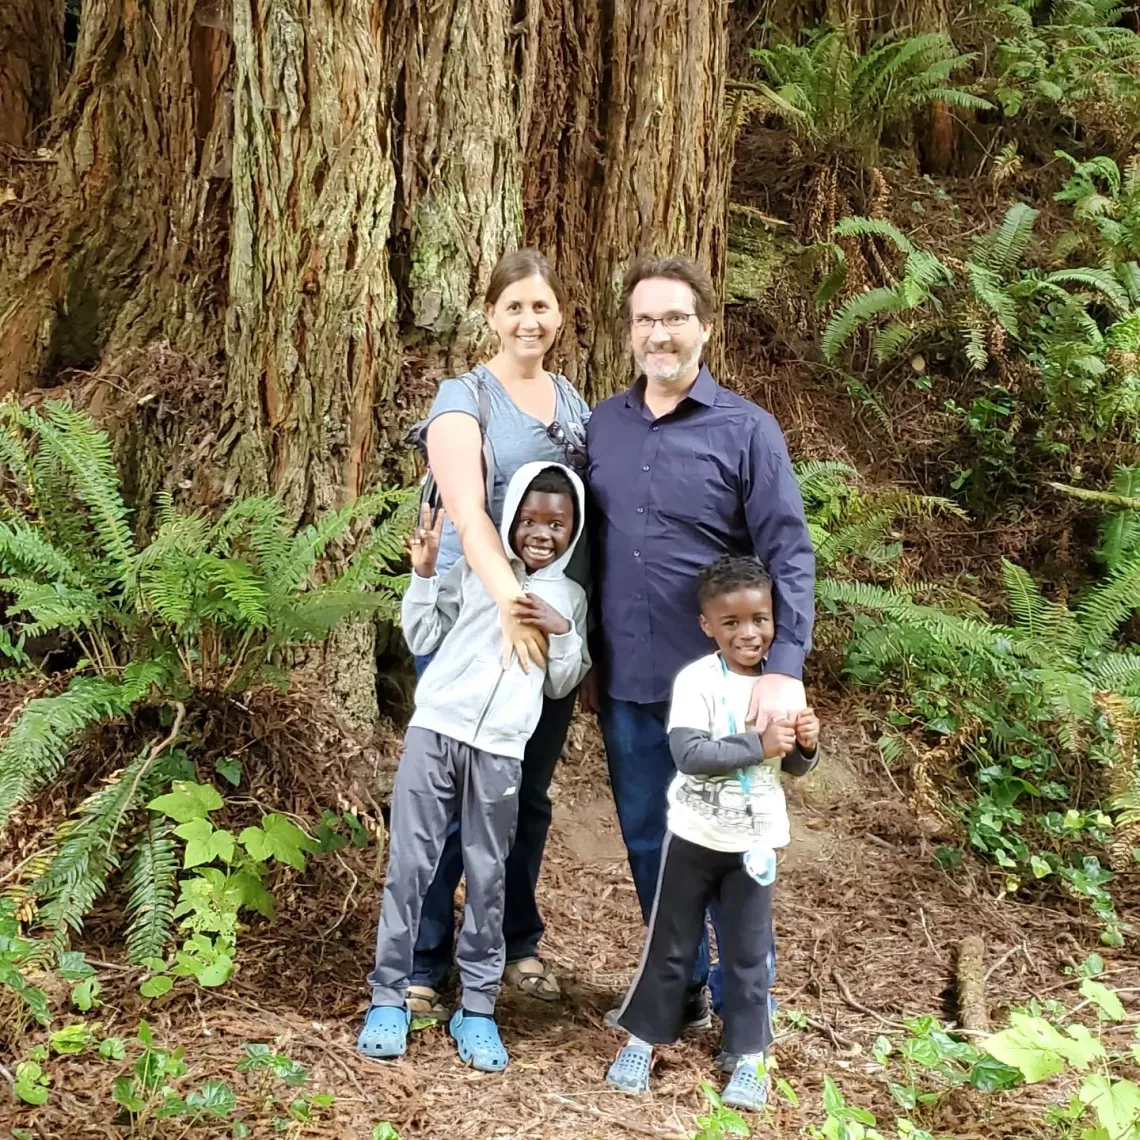 Jackie Ostfeld and Kyle Ash on a hike with their children in the redwood forests of Mendocino County.